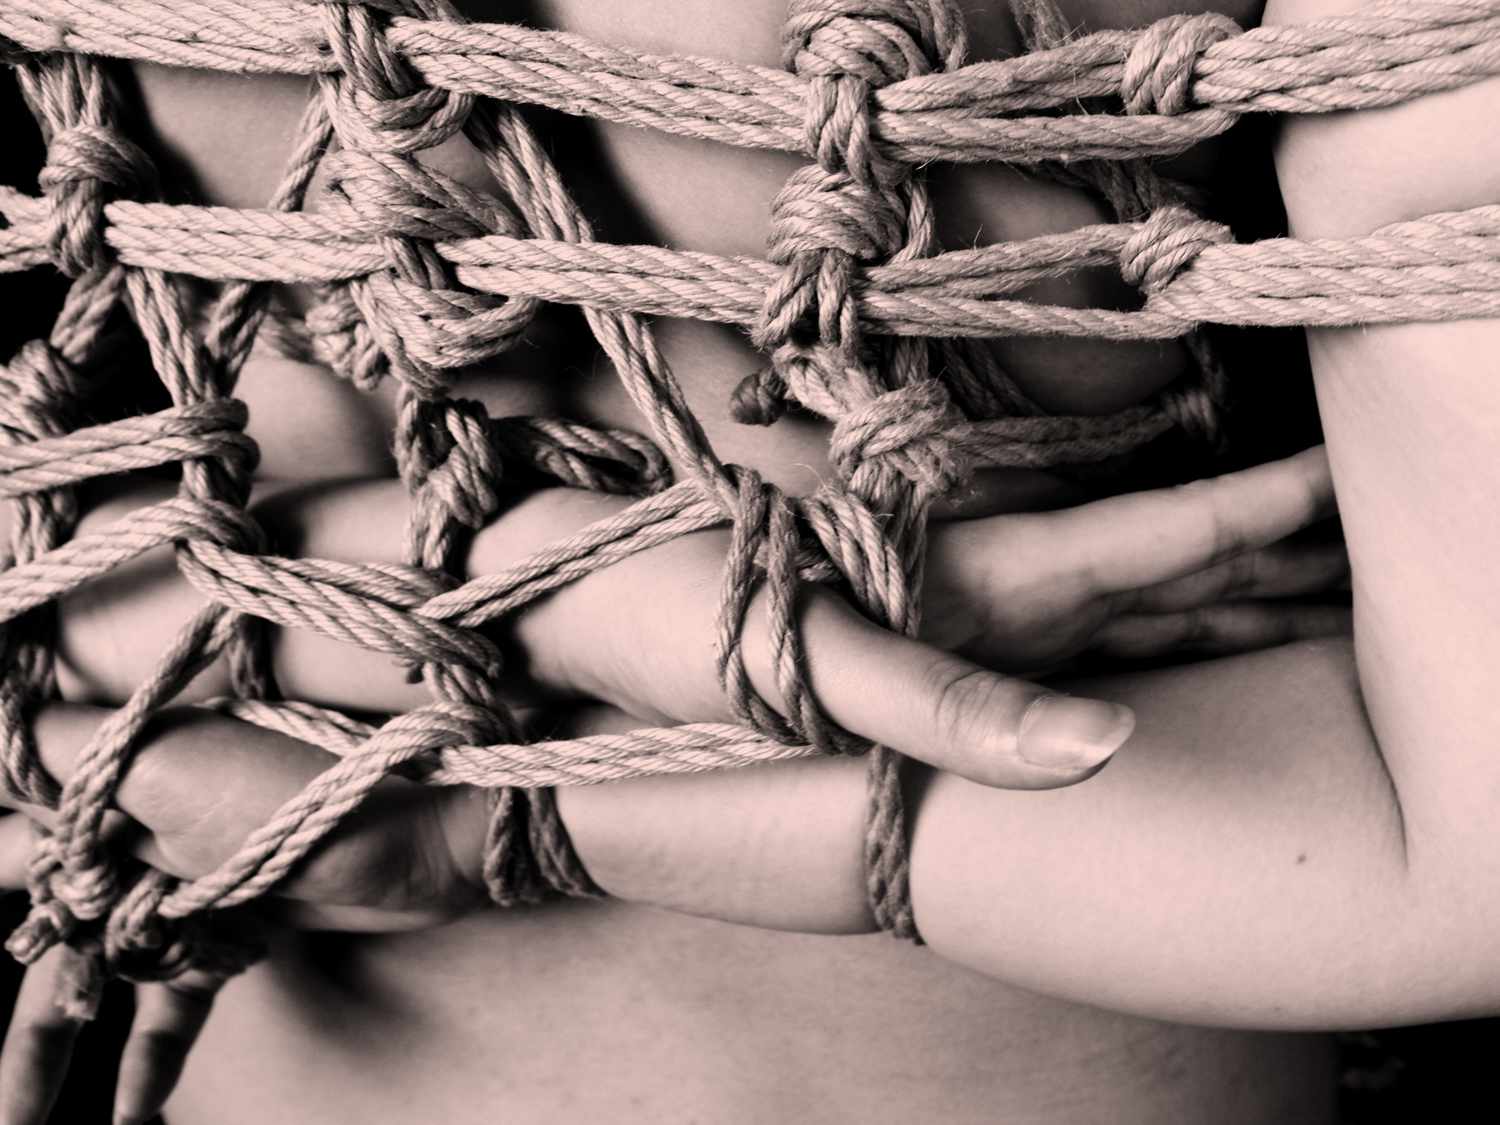 What to Know About Shibari, Rope Bondage